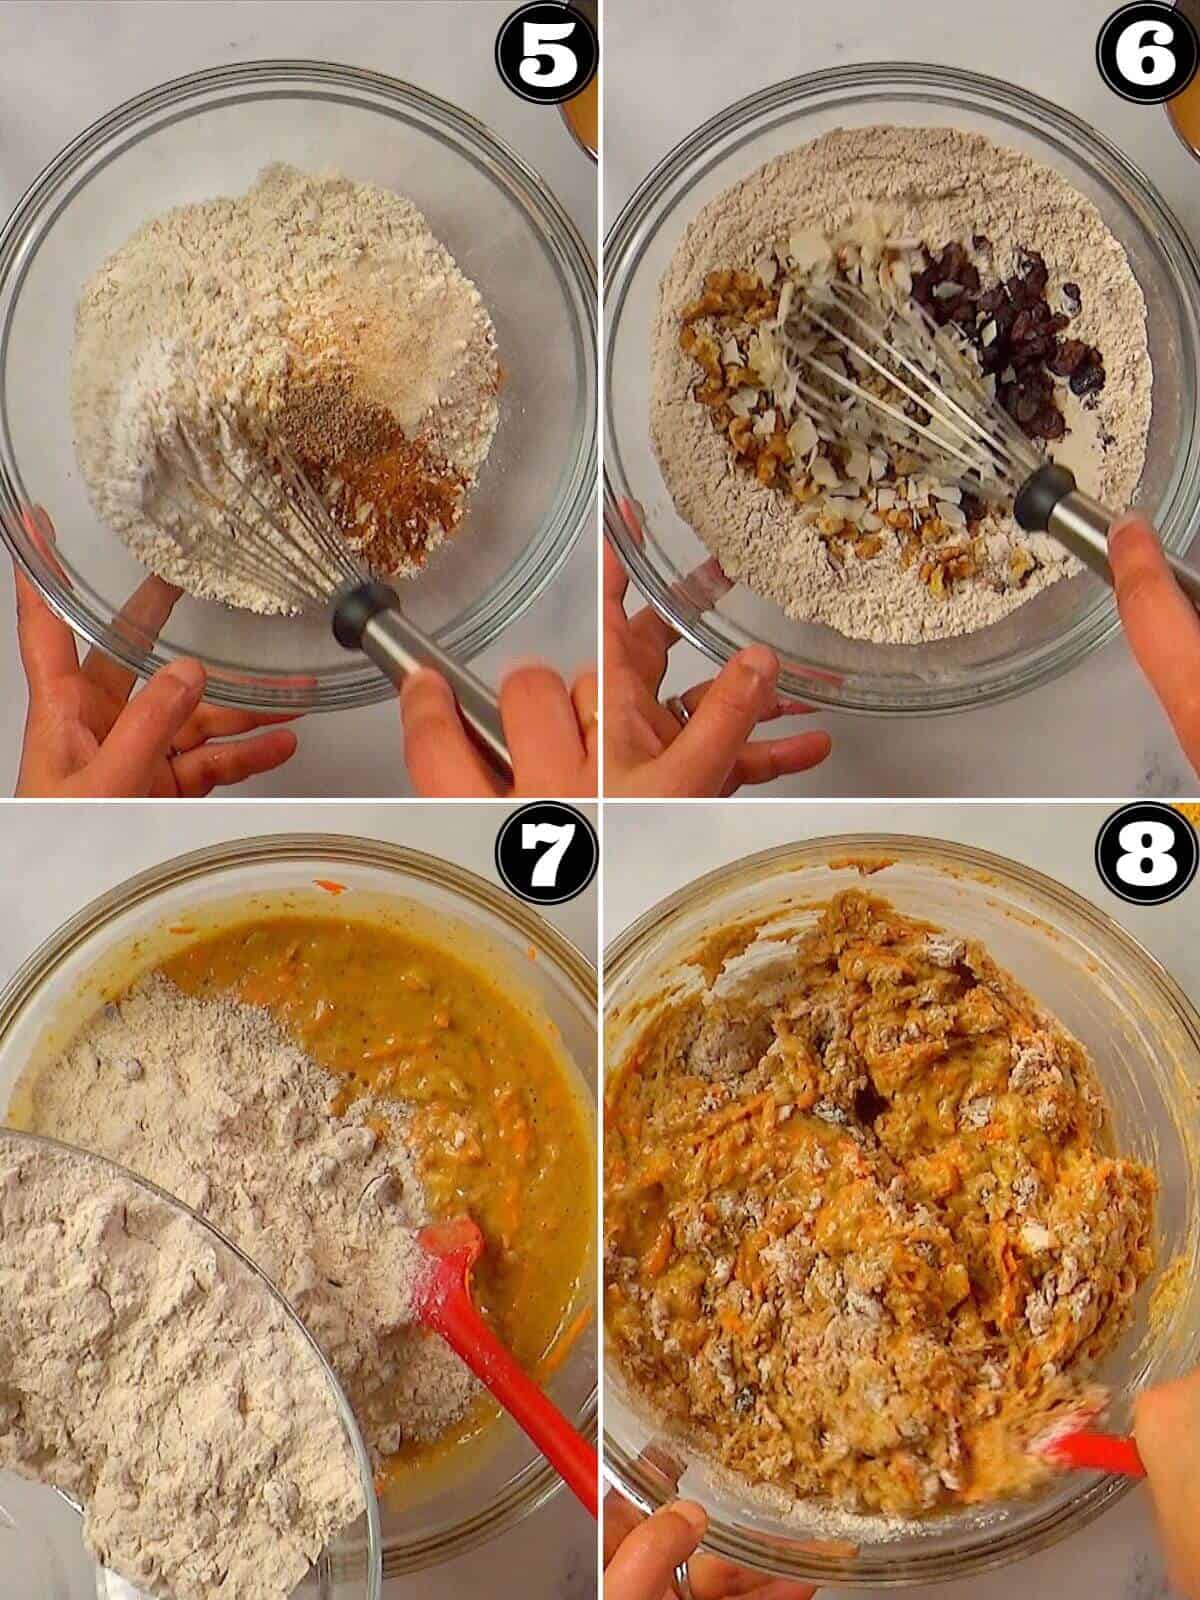 Combining all the dry ingredients and then mixing with wet ingredients.